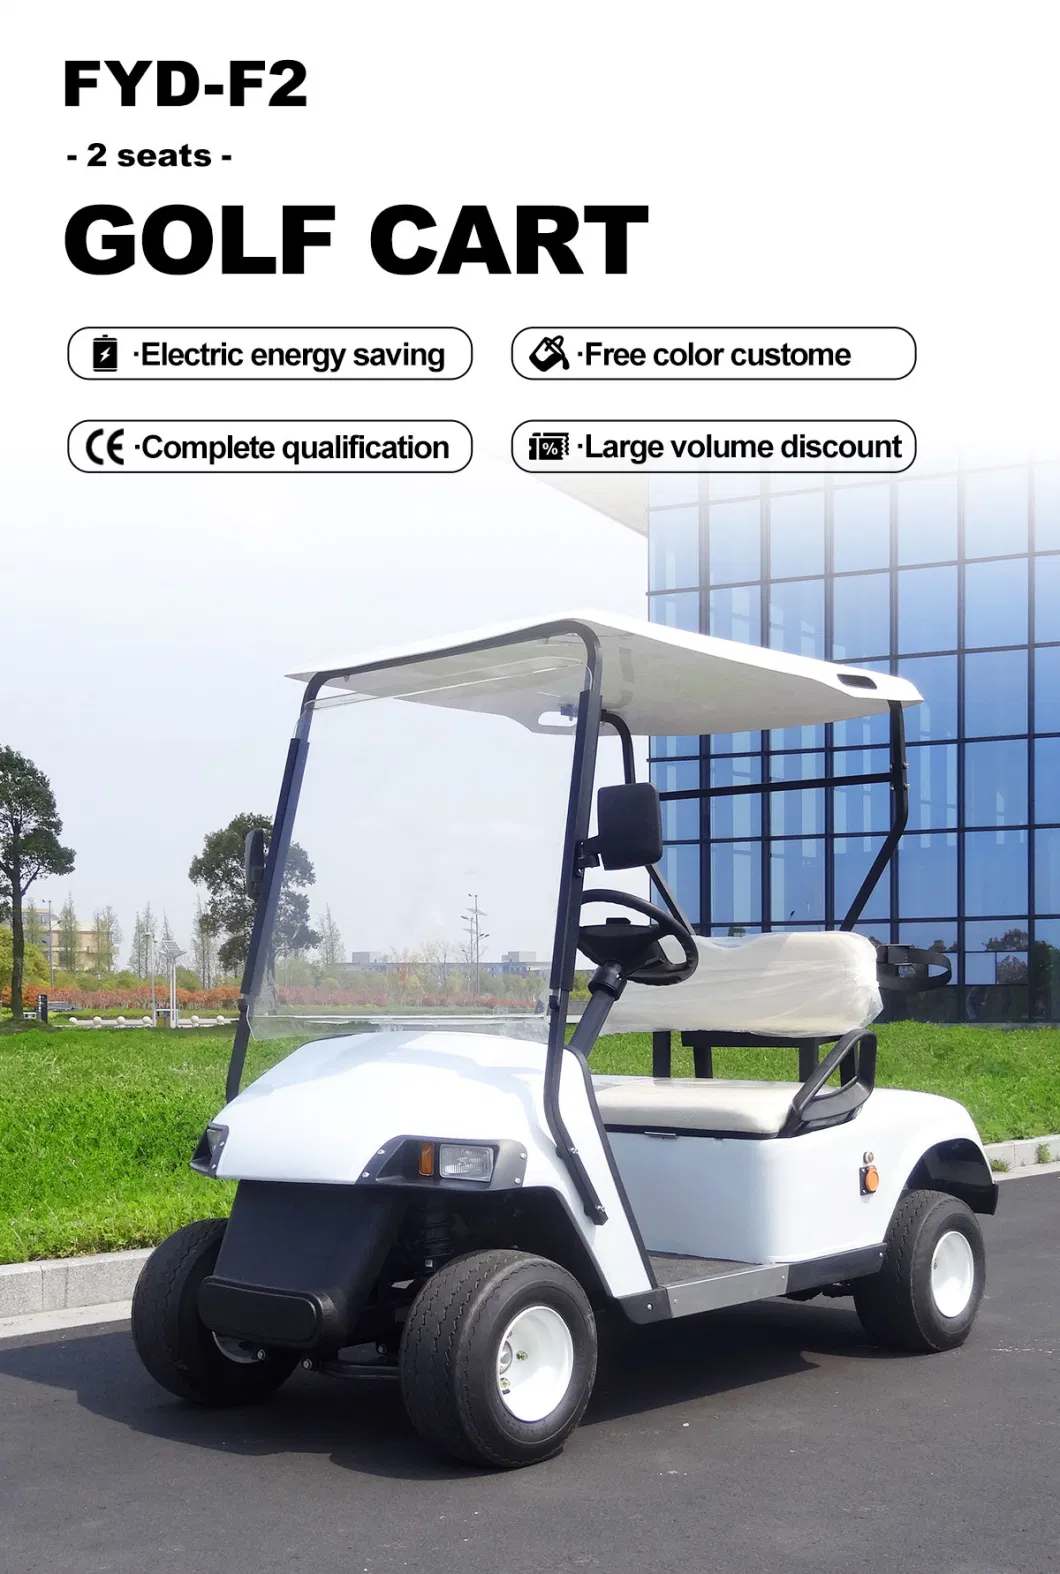 Western 2 Passenger Zone Club Car Electric Battery Powered Luxury Golf Carts